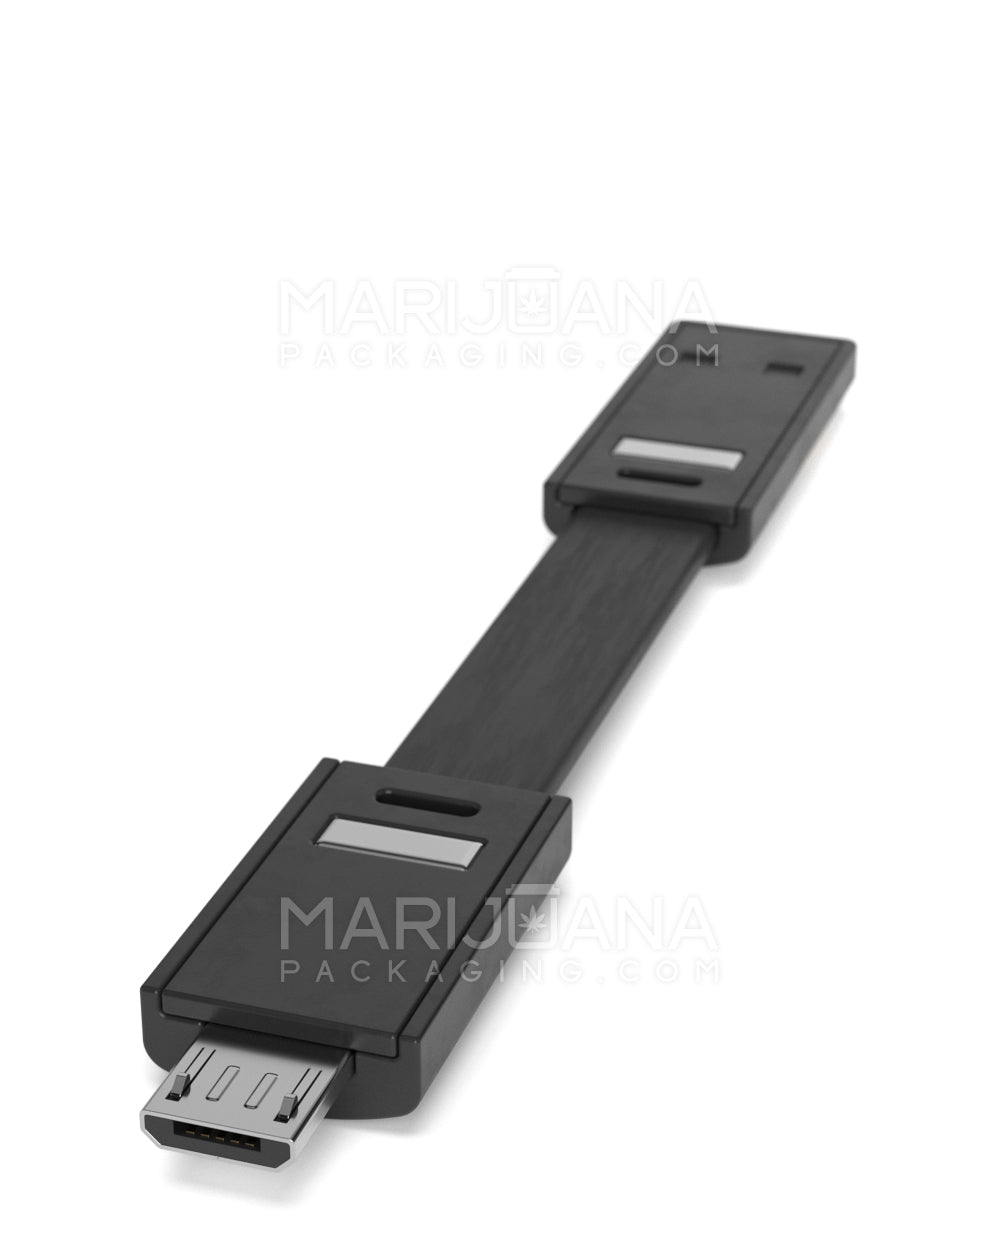 Vaporizer 3.5" USB to Micro USB Connection Cable | Black - 100 Count - 4